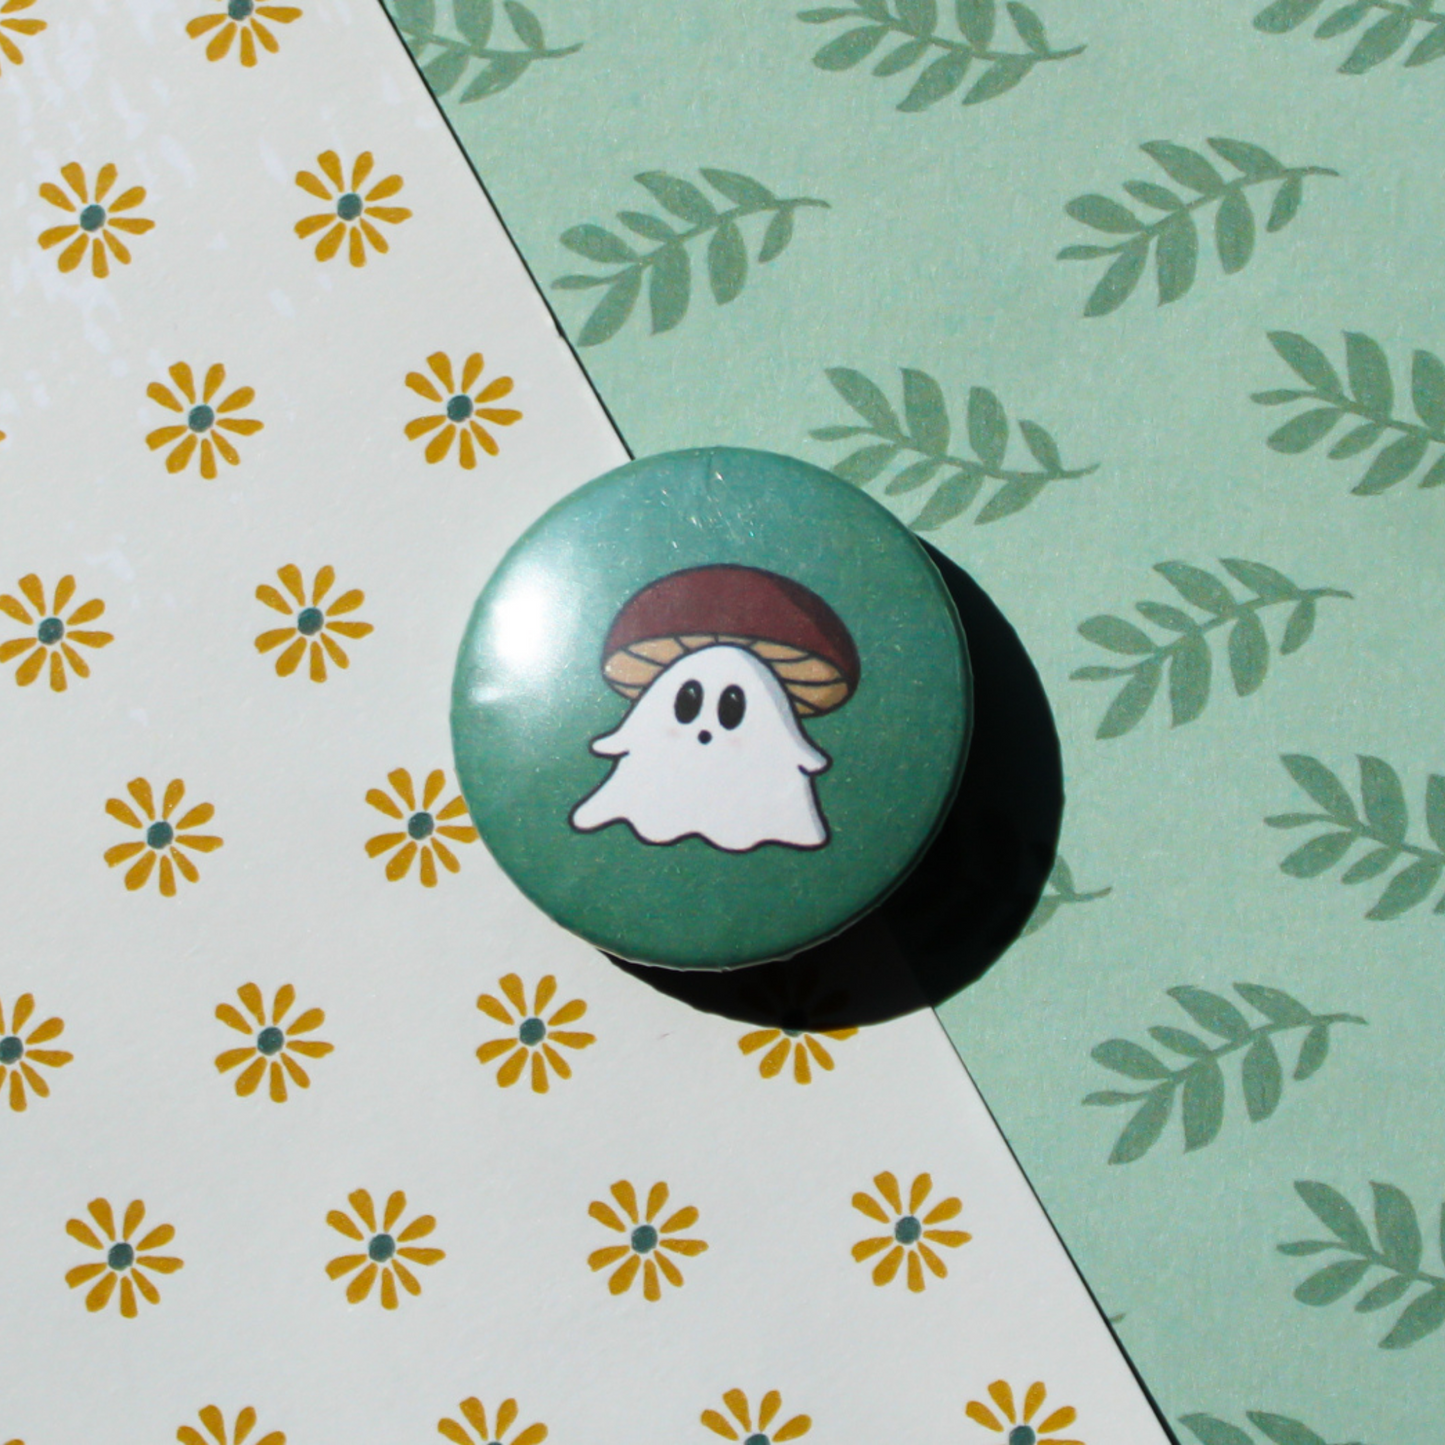 A flower and leaf patterned background with a green circle button with a shocked white ghost wearing a red mushroom cap.